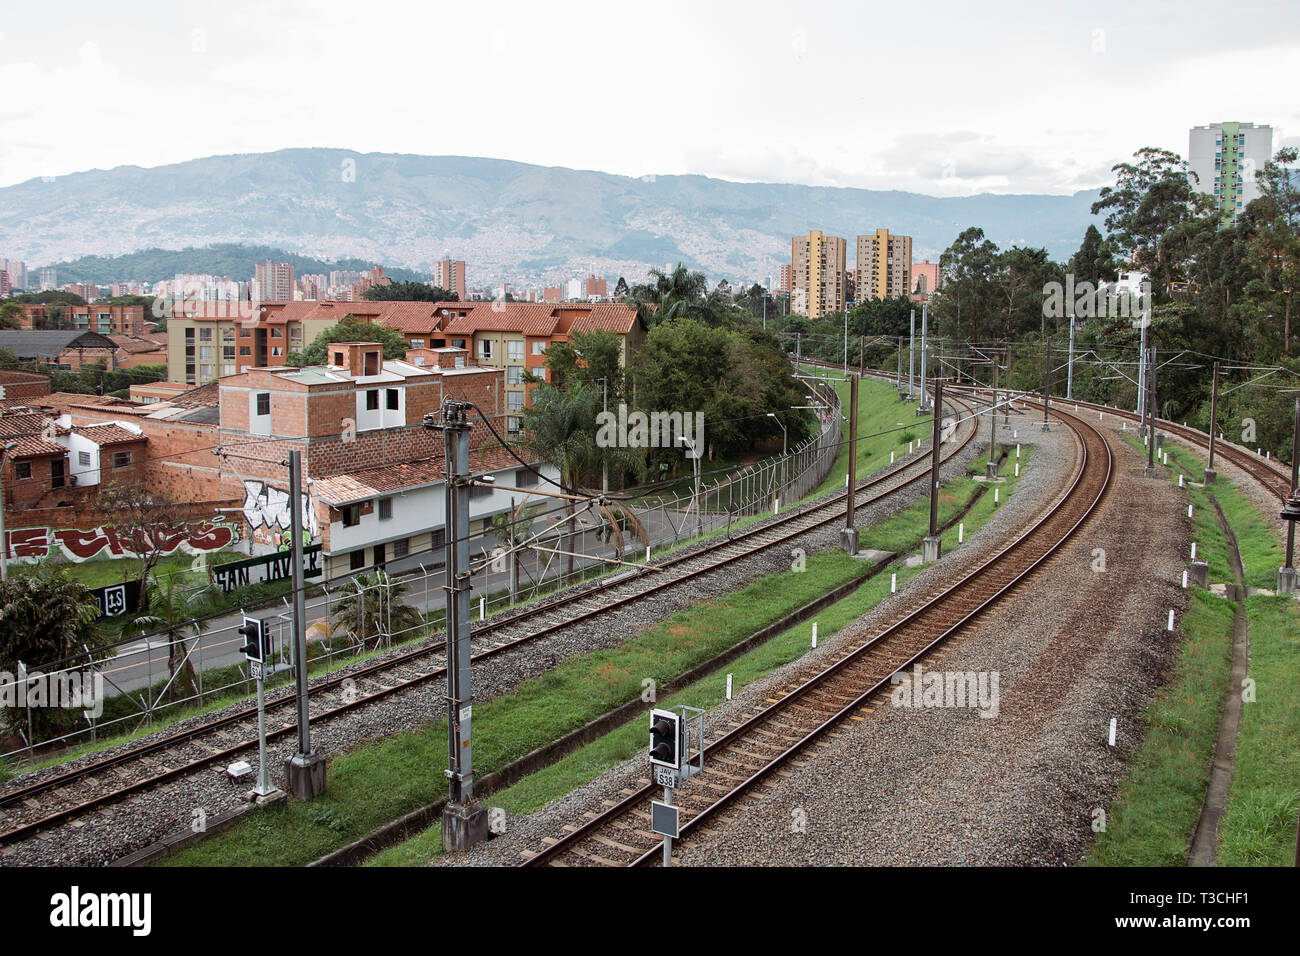 View of the train tracks and housing as seen from San Javier Metro station in Medellín (Medellin), Antioquia, Colombia Stock Photo